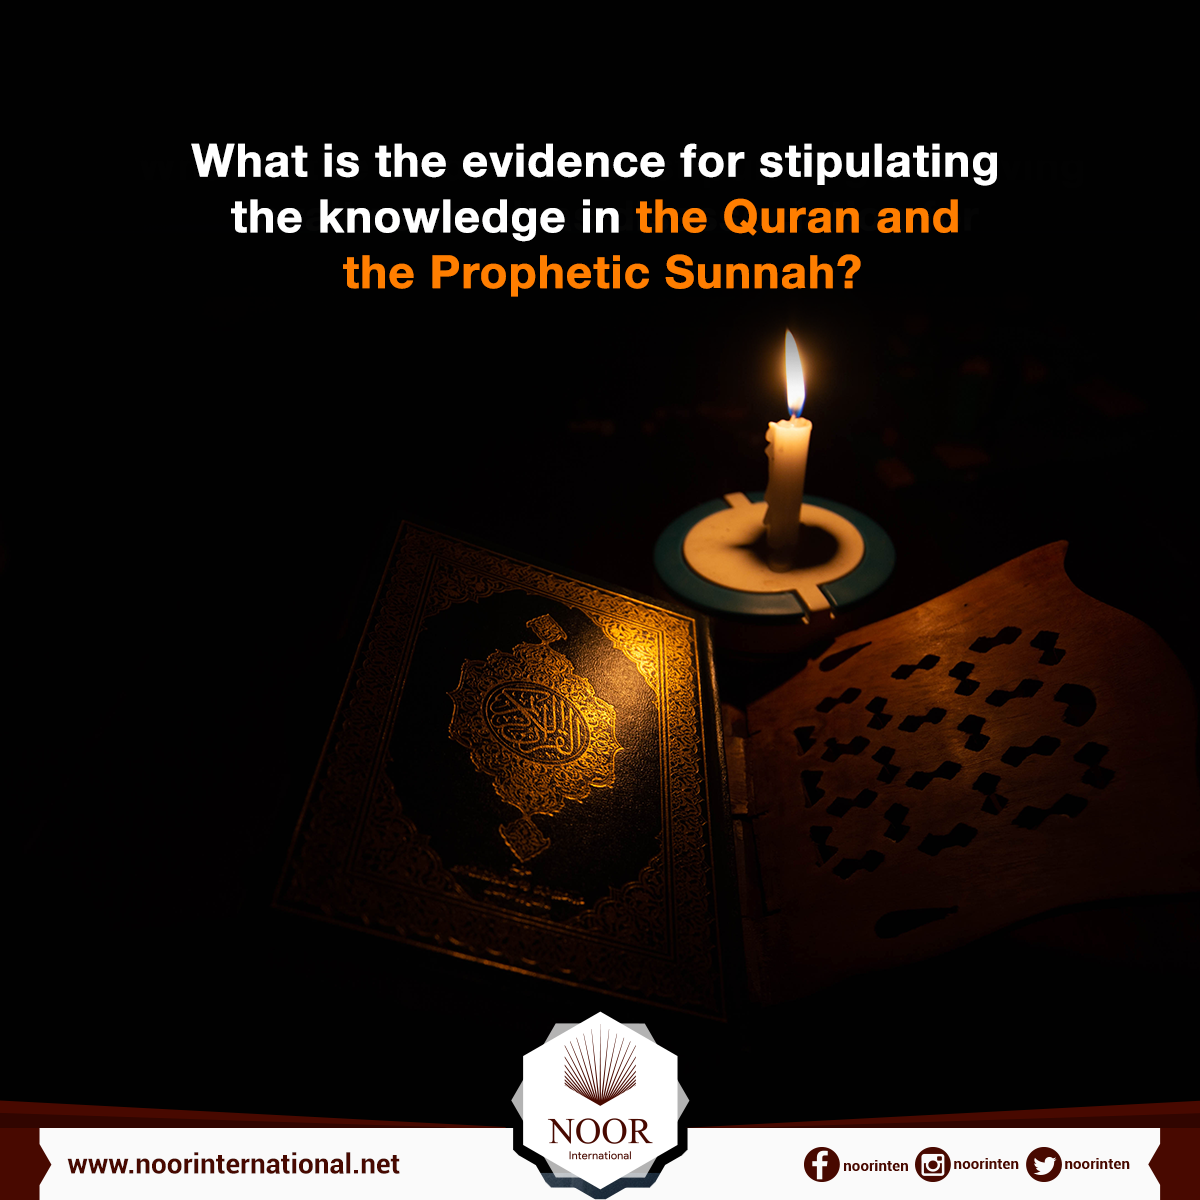 What is the evidence for stipulating knowledge in the Quran and the Prophetic Sunnah?